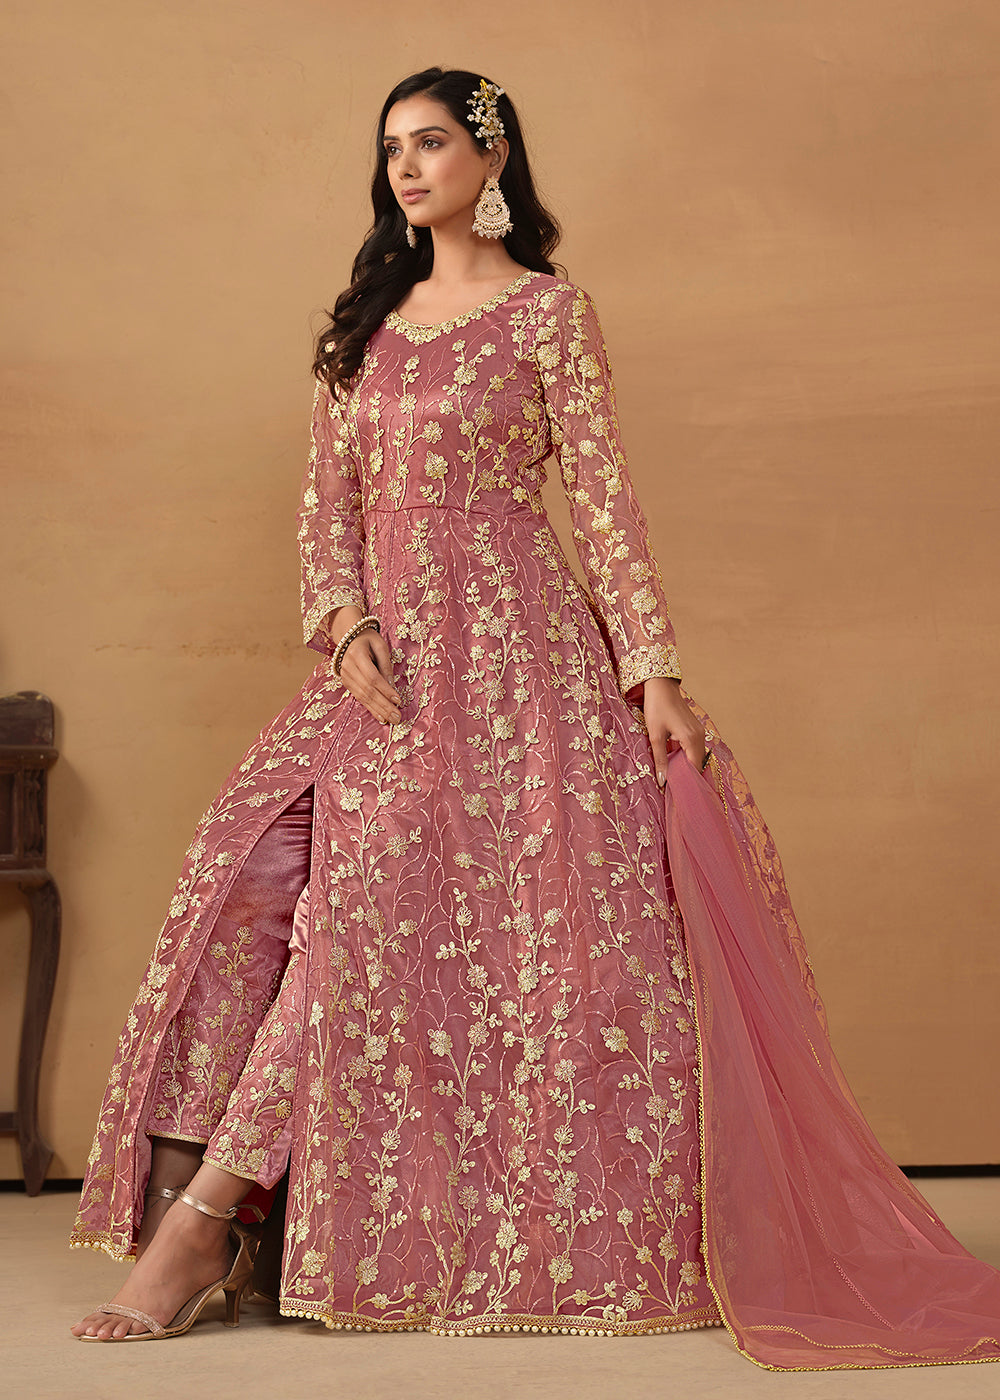 Buy Now Pant Style Coral Pink Embroidered Net Wedding Anarkali Suit Online in USA, UK, Australia, New Zealand, Canada & Worldwide at Empress Clothing. 